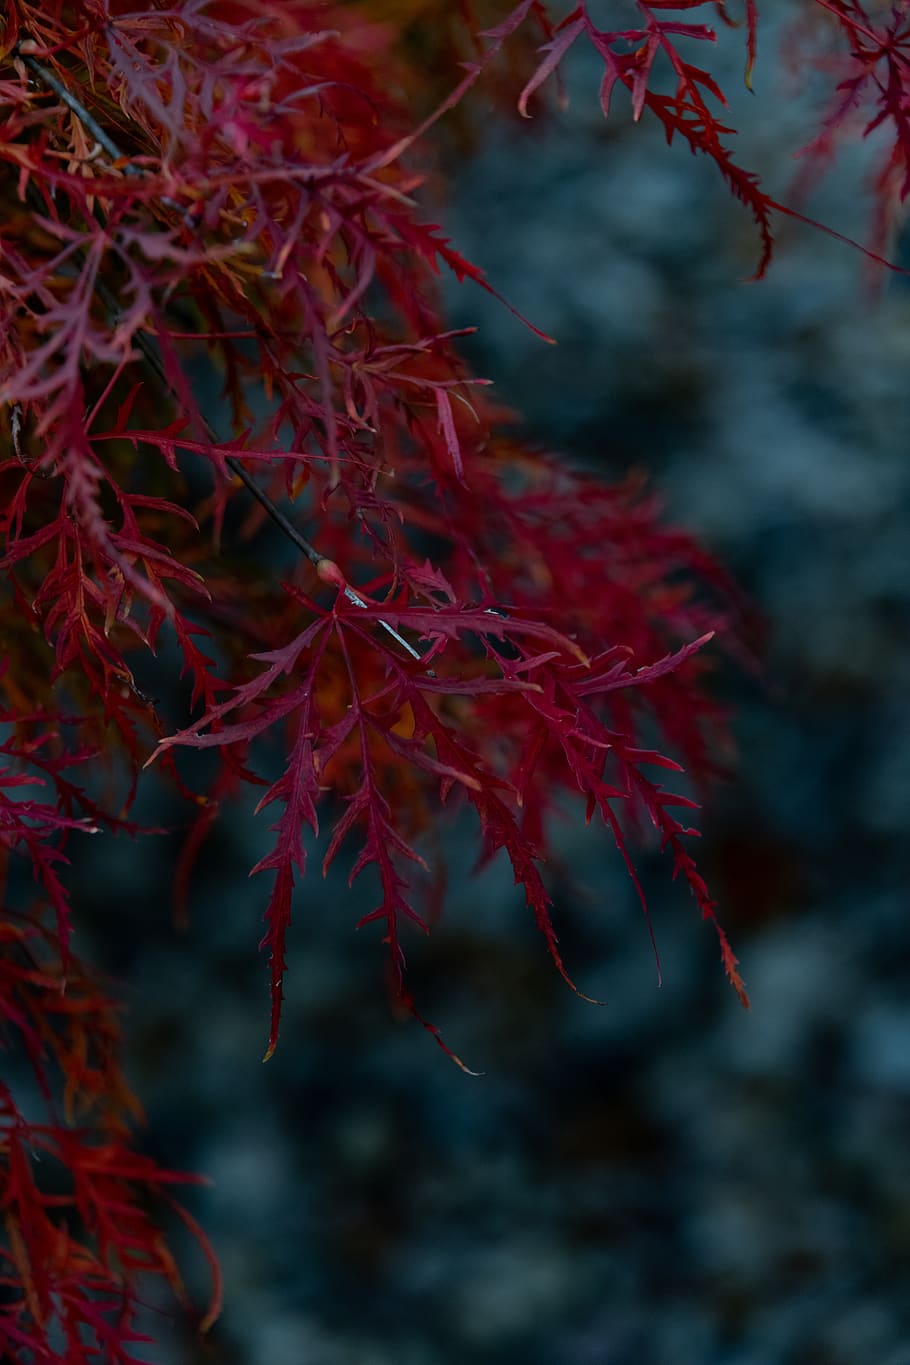 leaves, fall, plants, mystery, dreamy, dreary, red, color, mood, autumn